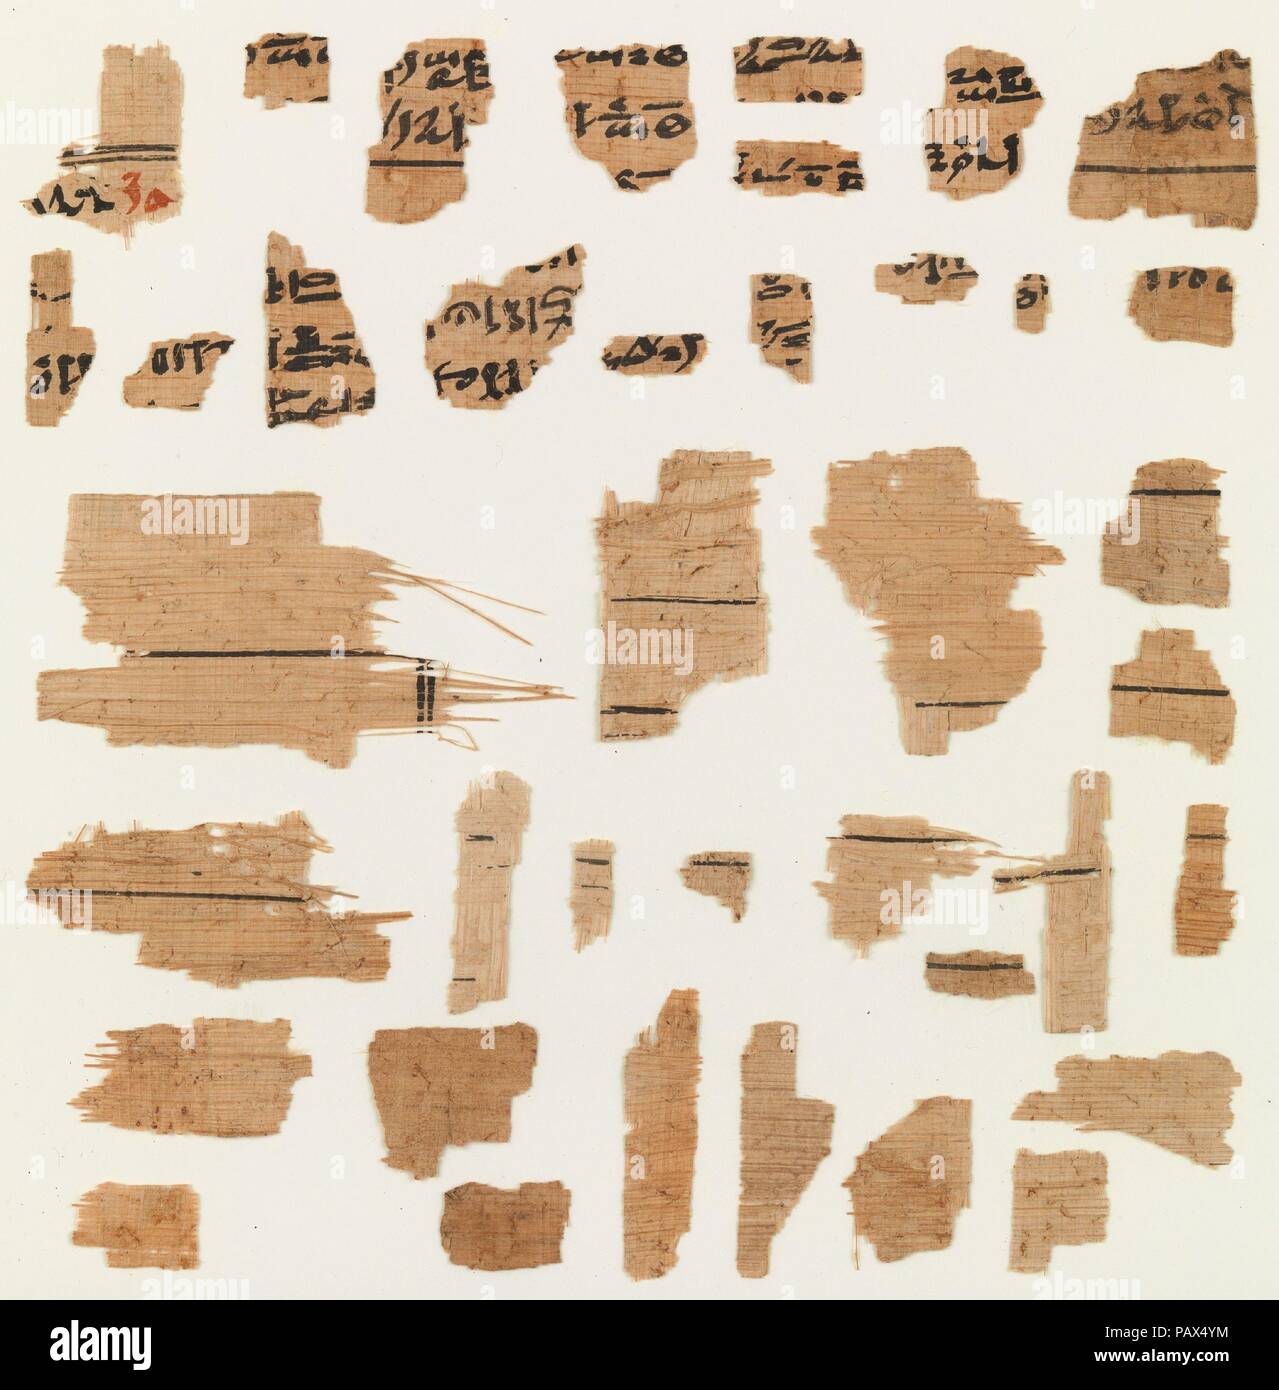 Fragments from the Funerary Papyrus of Khamhor. Dimensions: various. Dynasty: Dynasty 19-26. Date: 664-525 B.C.. Museum: Metropolitan Museum of Art, New York, USA. Stock Photo